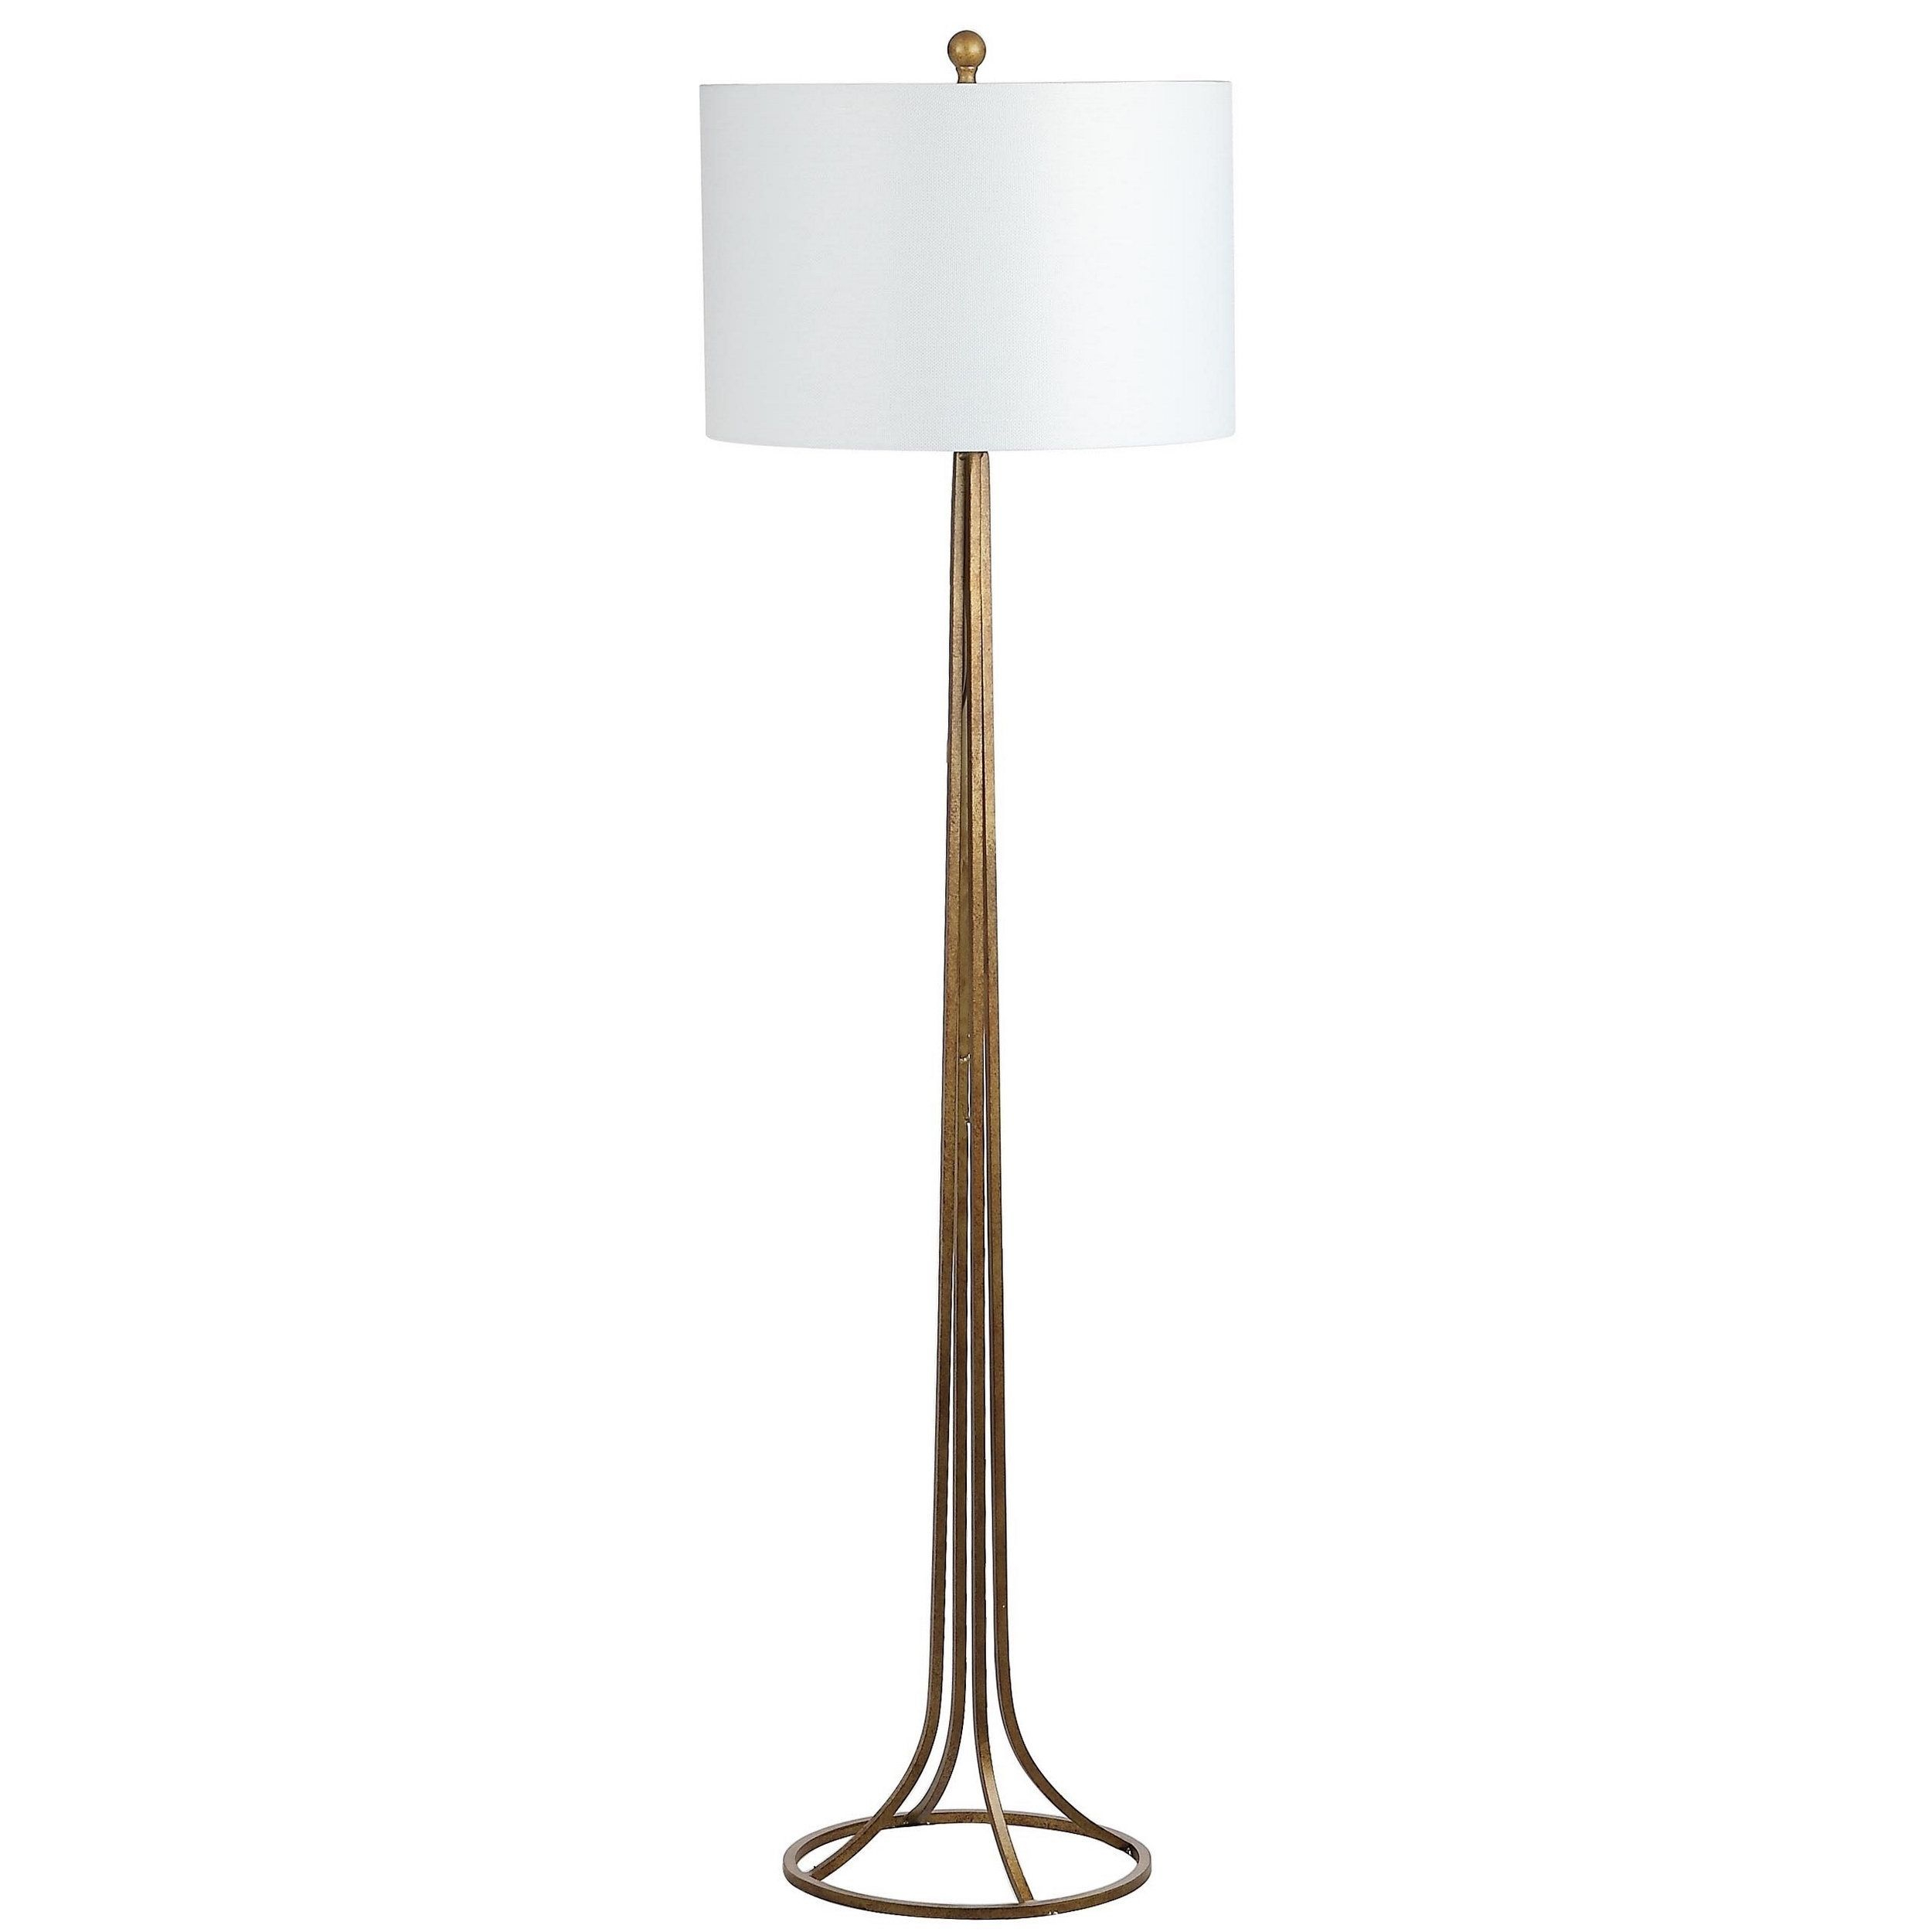 Safavieh Lighting Draven 60 Inch Floor Lamp Lit4514a Gold for dimensions 2500 X 2500